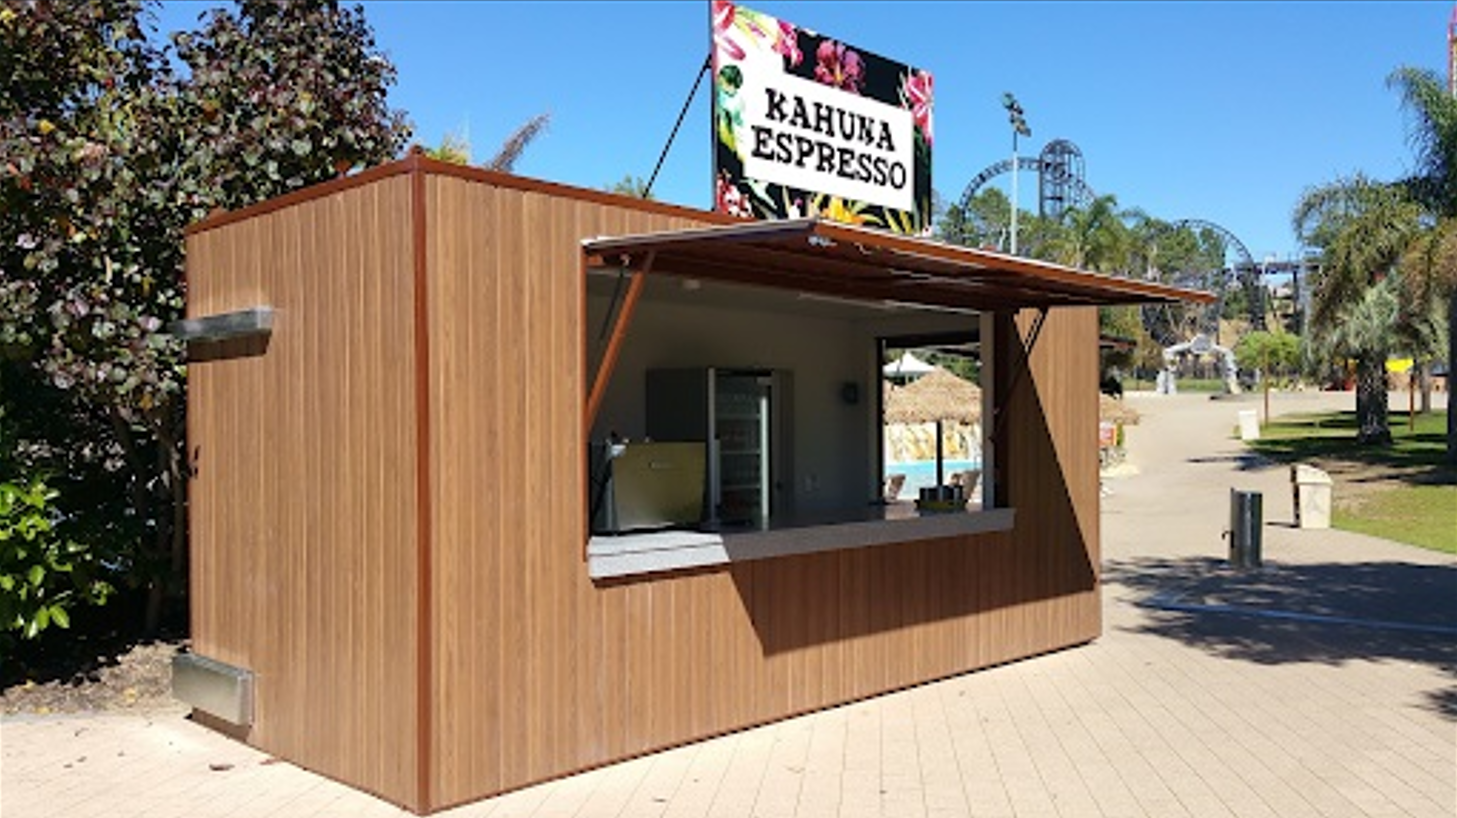 Small outdoor café constructed from a shipping container, featuring a wooden facade and an open serving window under a sign reading 'Kahuna Espresso'.